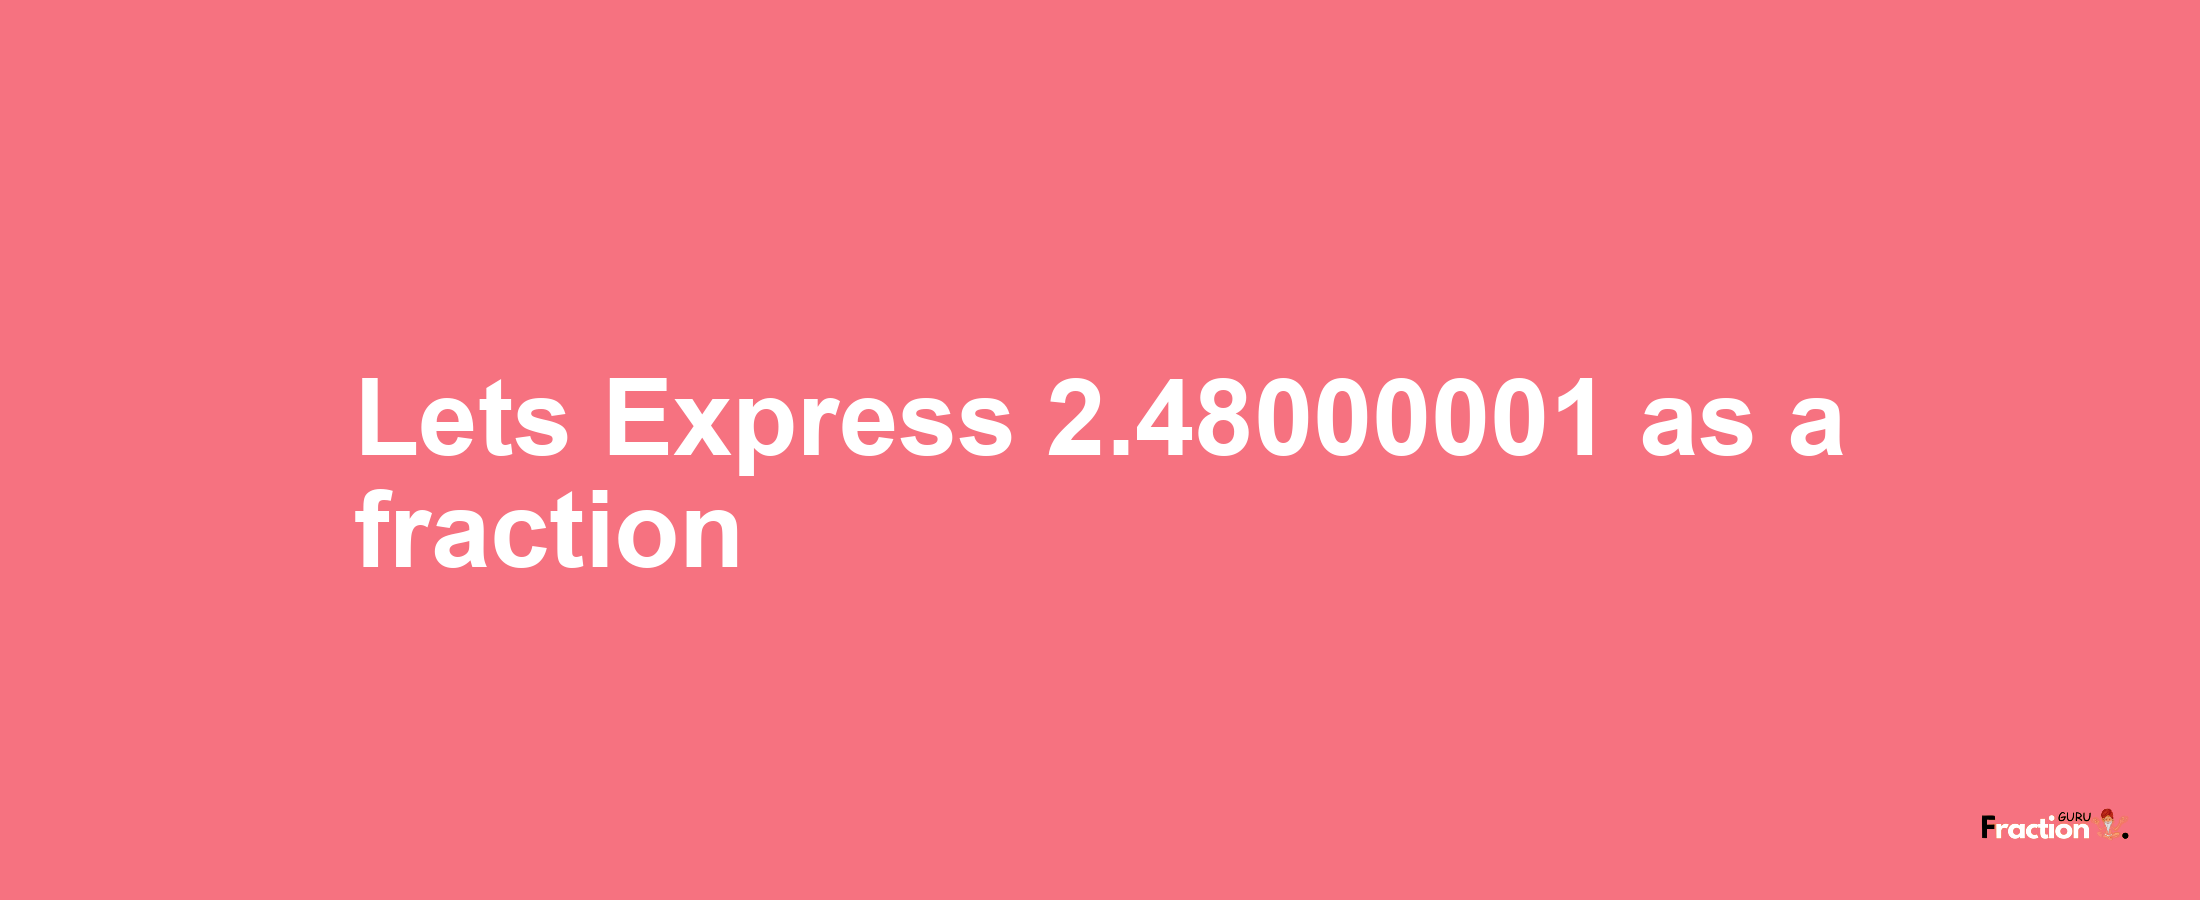 Lets Express 2.48000001 as afraction